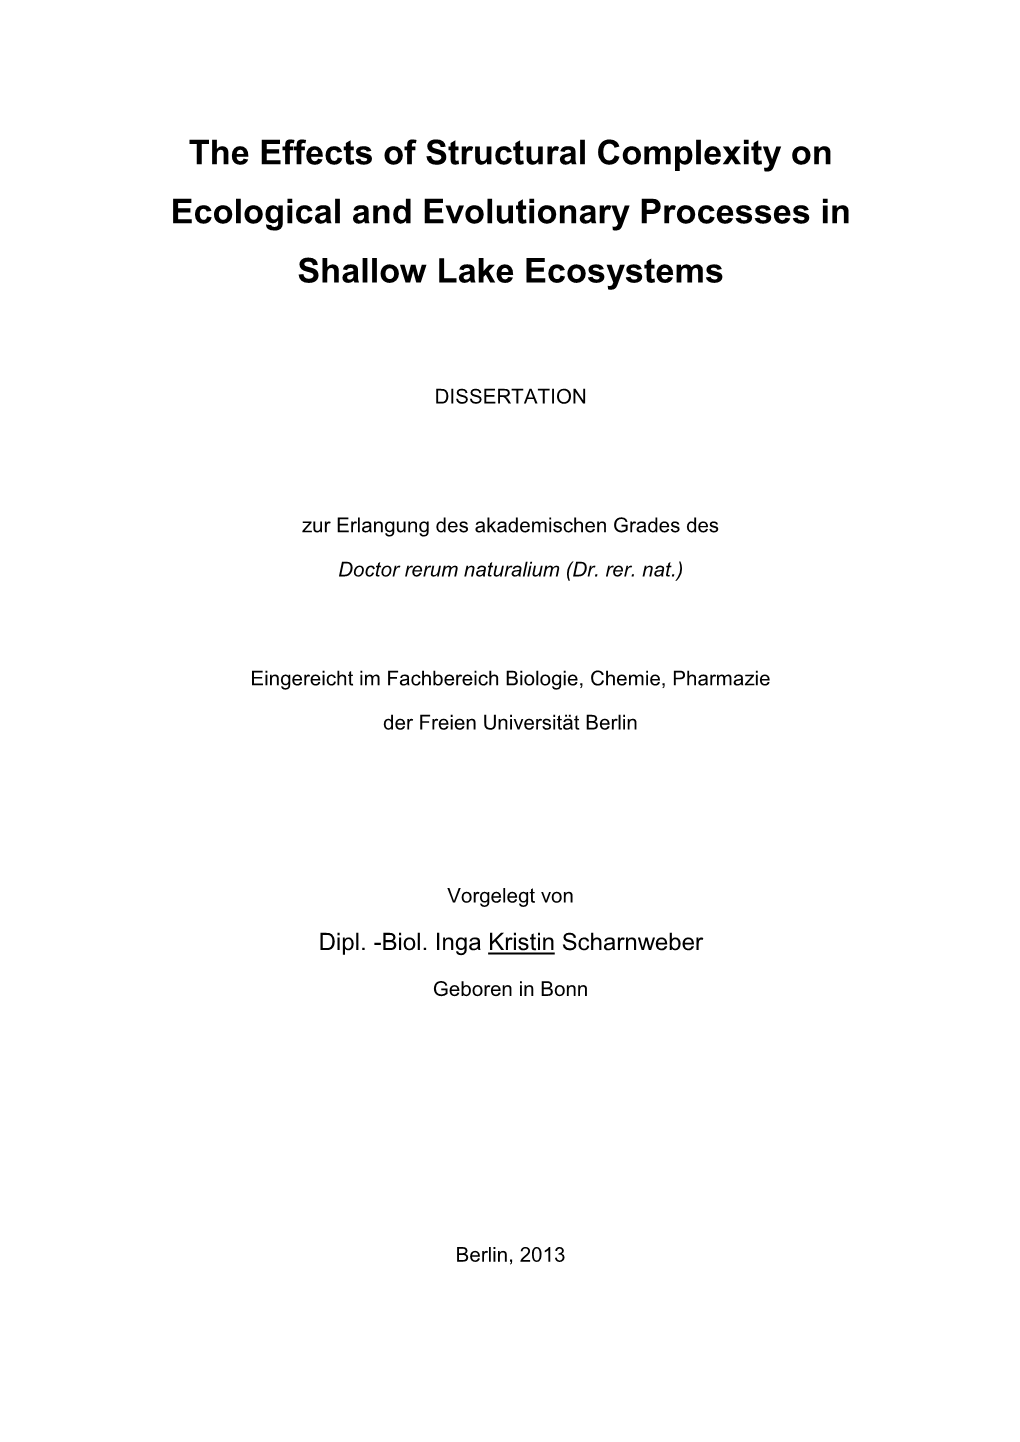 The Effects of Structural Complexity on Ecological and Evolutionary Processes in Shallow Lake Ecosystems